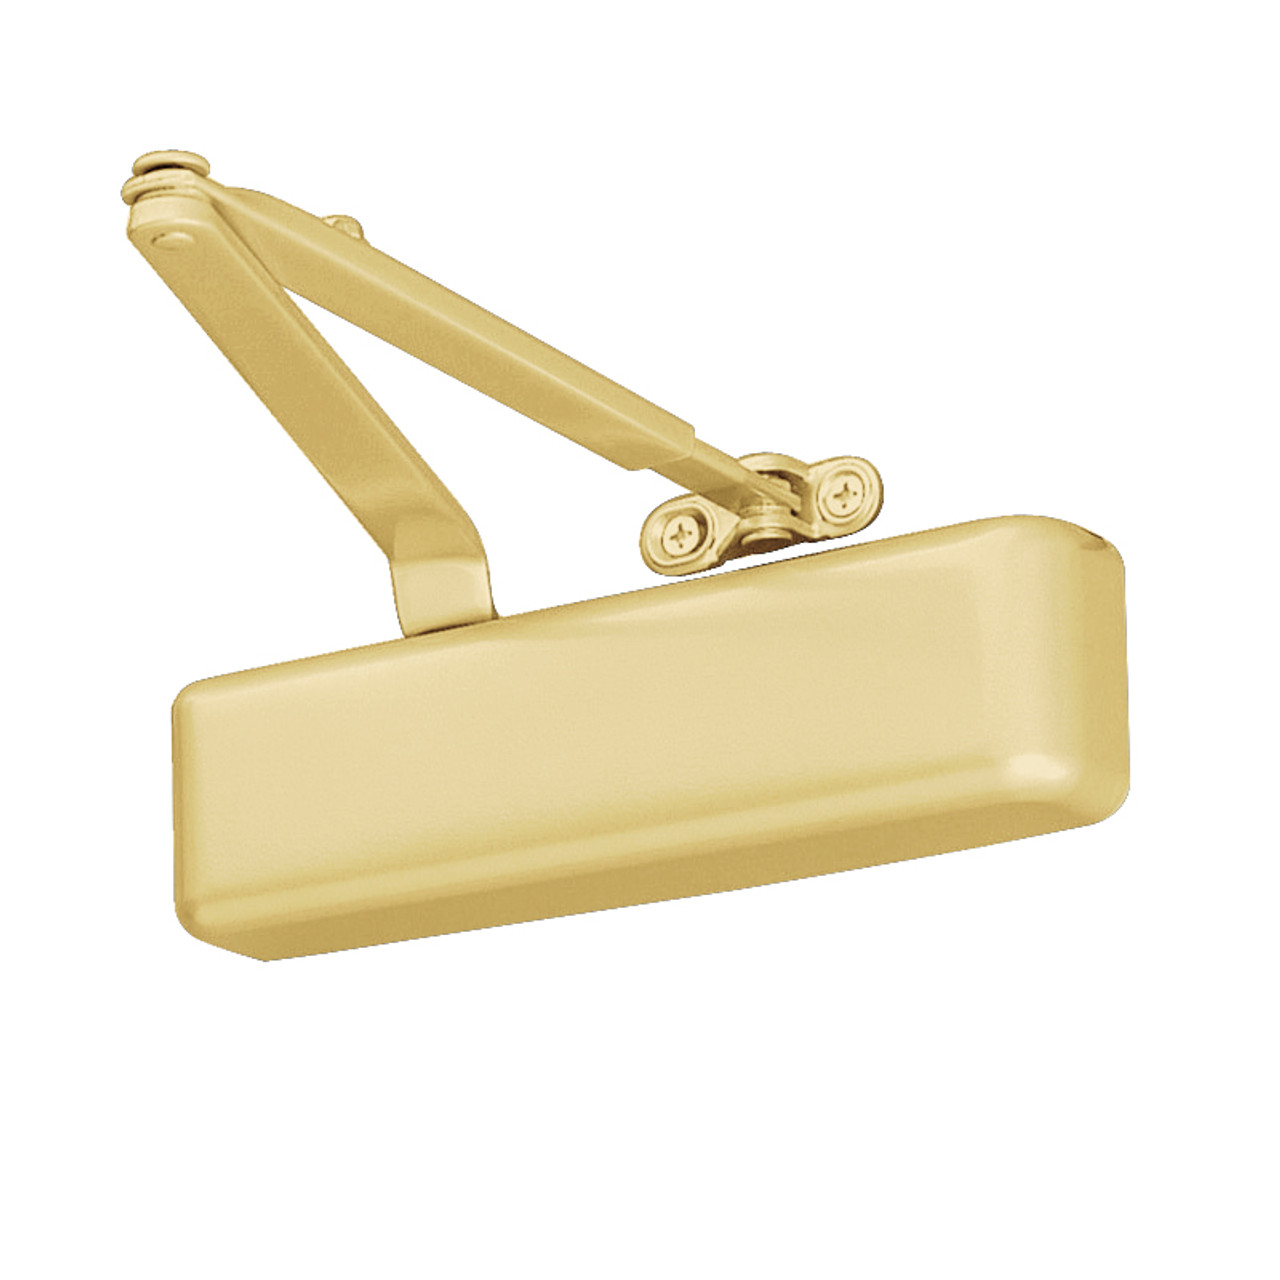 4031-Rw-PA-US4 LCN Door Closer Regular Arm with Parallel Arm Shoe in Satin Brass Finish